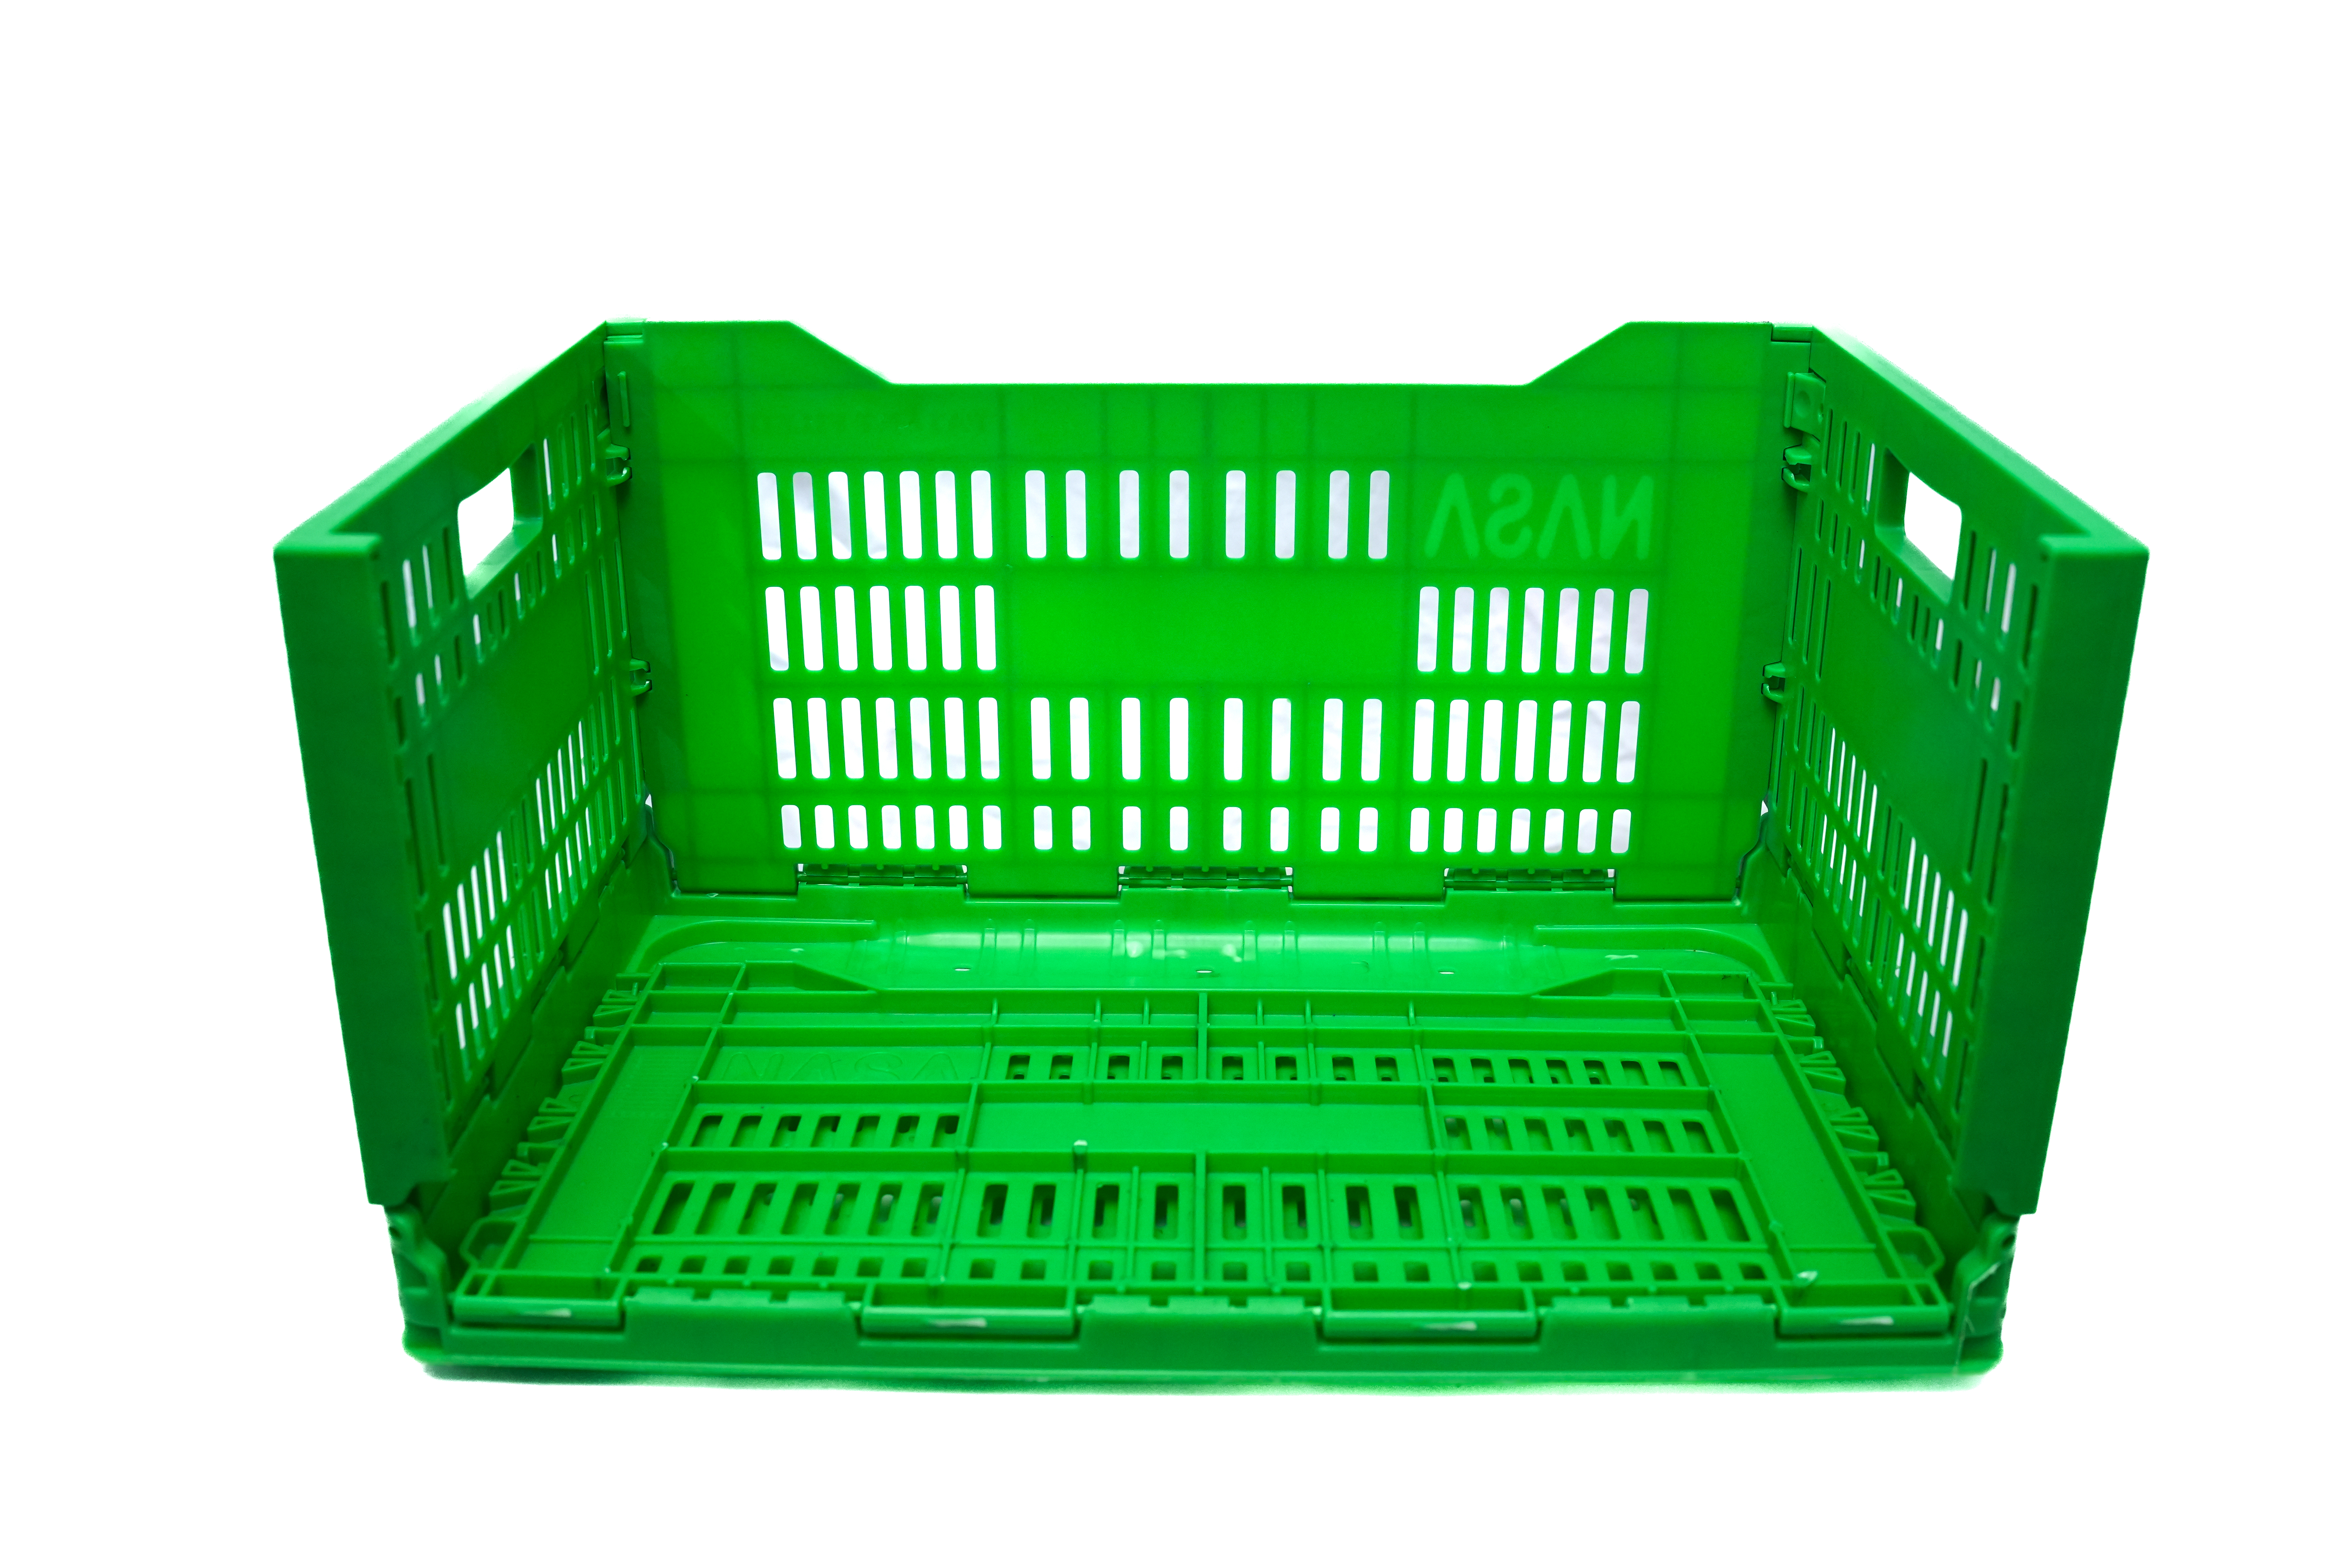 HDPE Collapsible Crate Manufacturer, Supplier, and Exporter from Indi